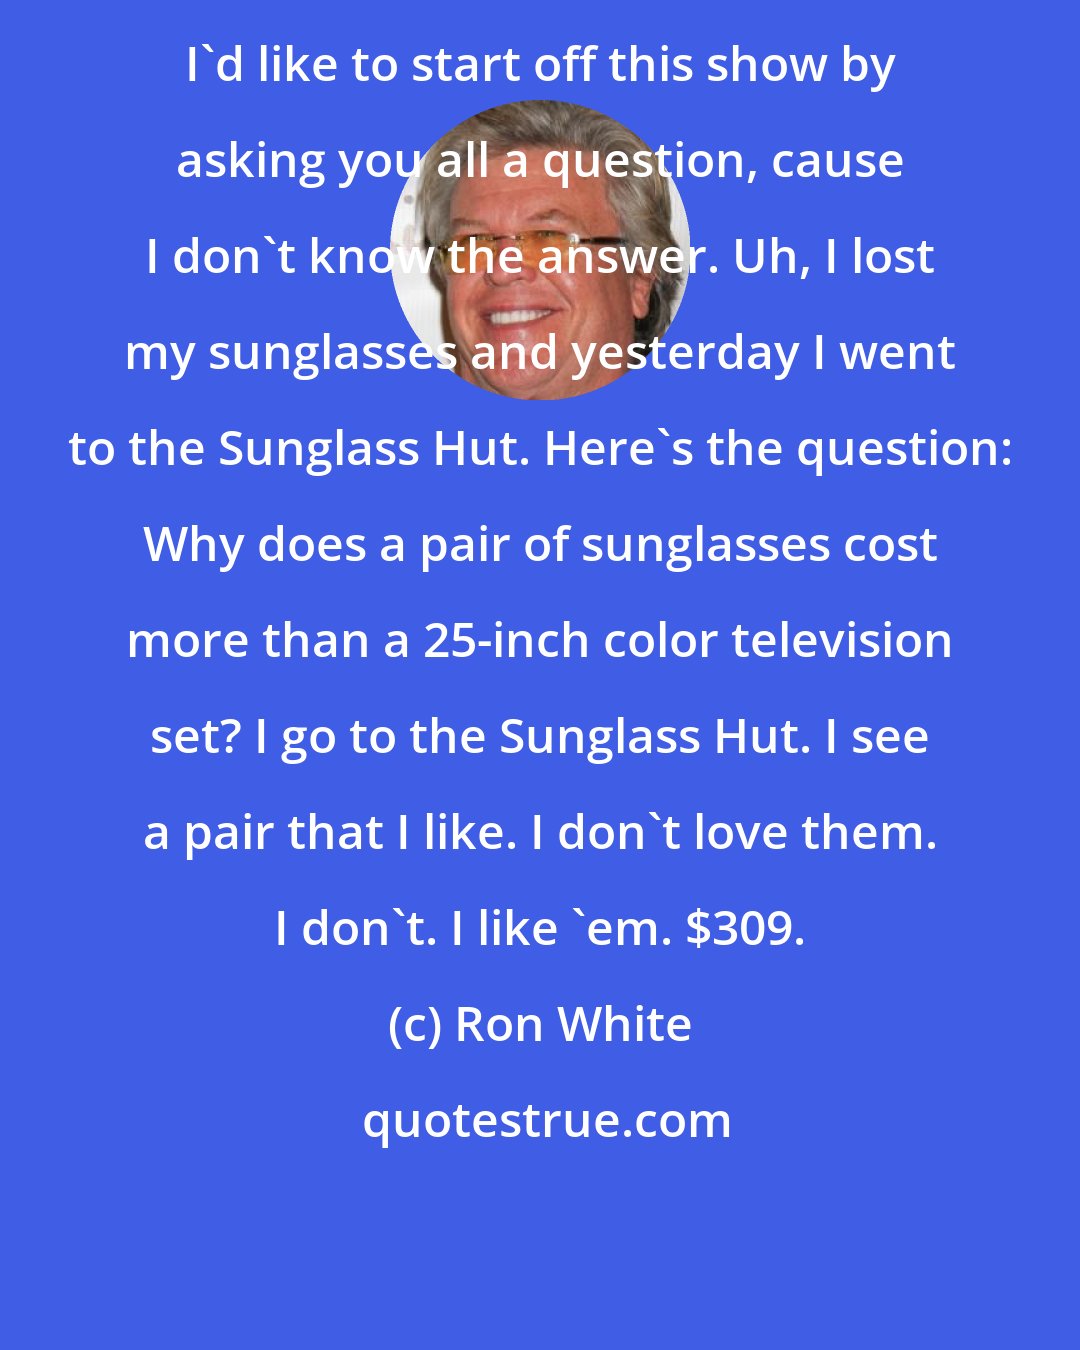 Ron White: I'd like to start off this show by asking you all a question, cause I don't know the answer. Uh, I lost my sunglasses and yesterday I went to the Sunglass Hut. Here's the question: Why does a pair of sunglasses cost more than a 25-inch color television set? I go to the Sunglass Hut. I see a pair that I like. I don't love them. I don't. I like 'em. $309.